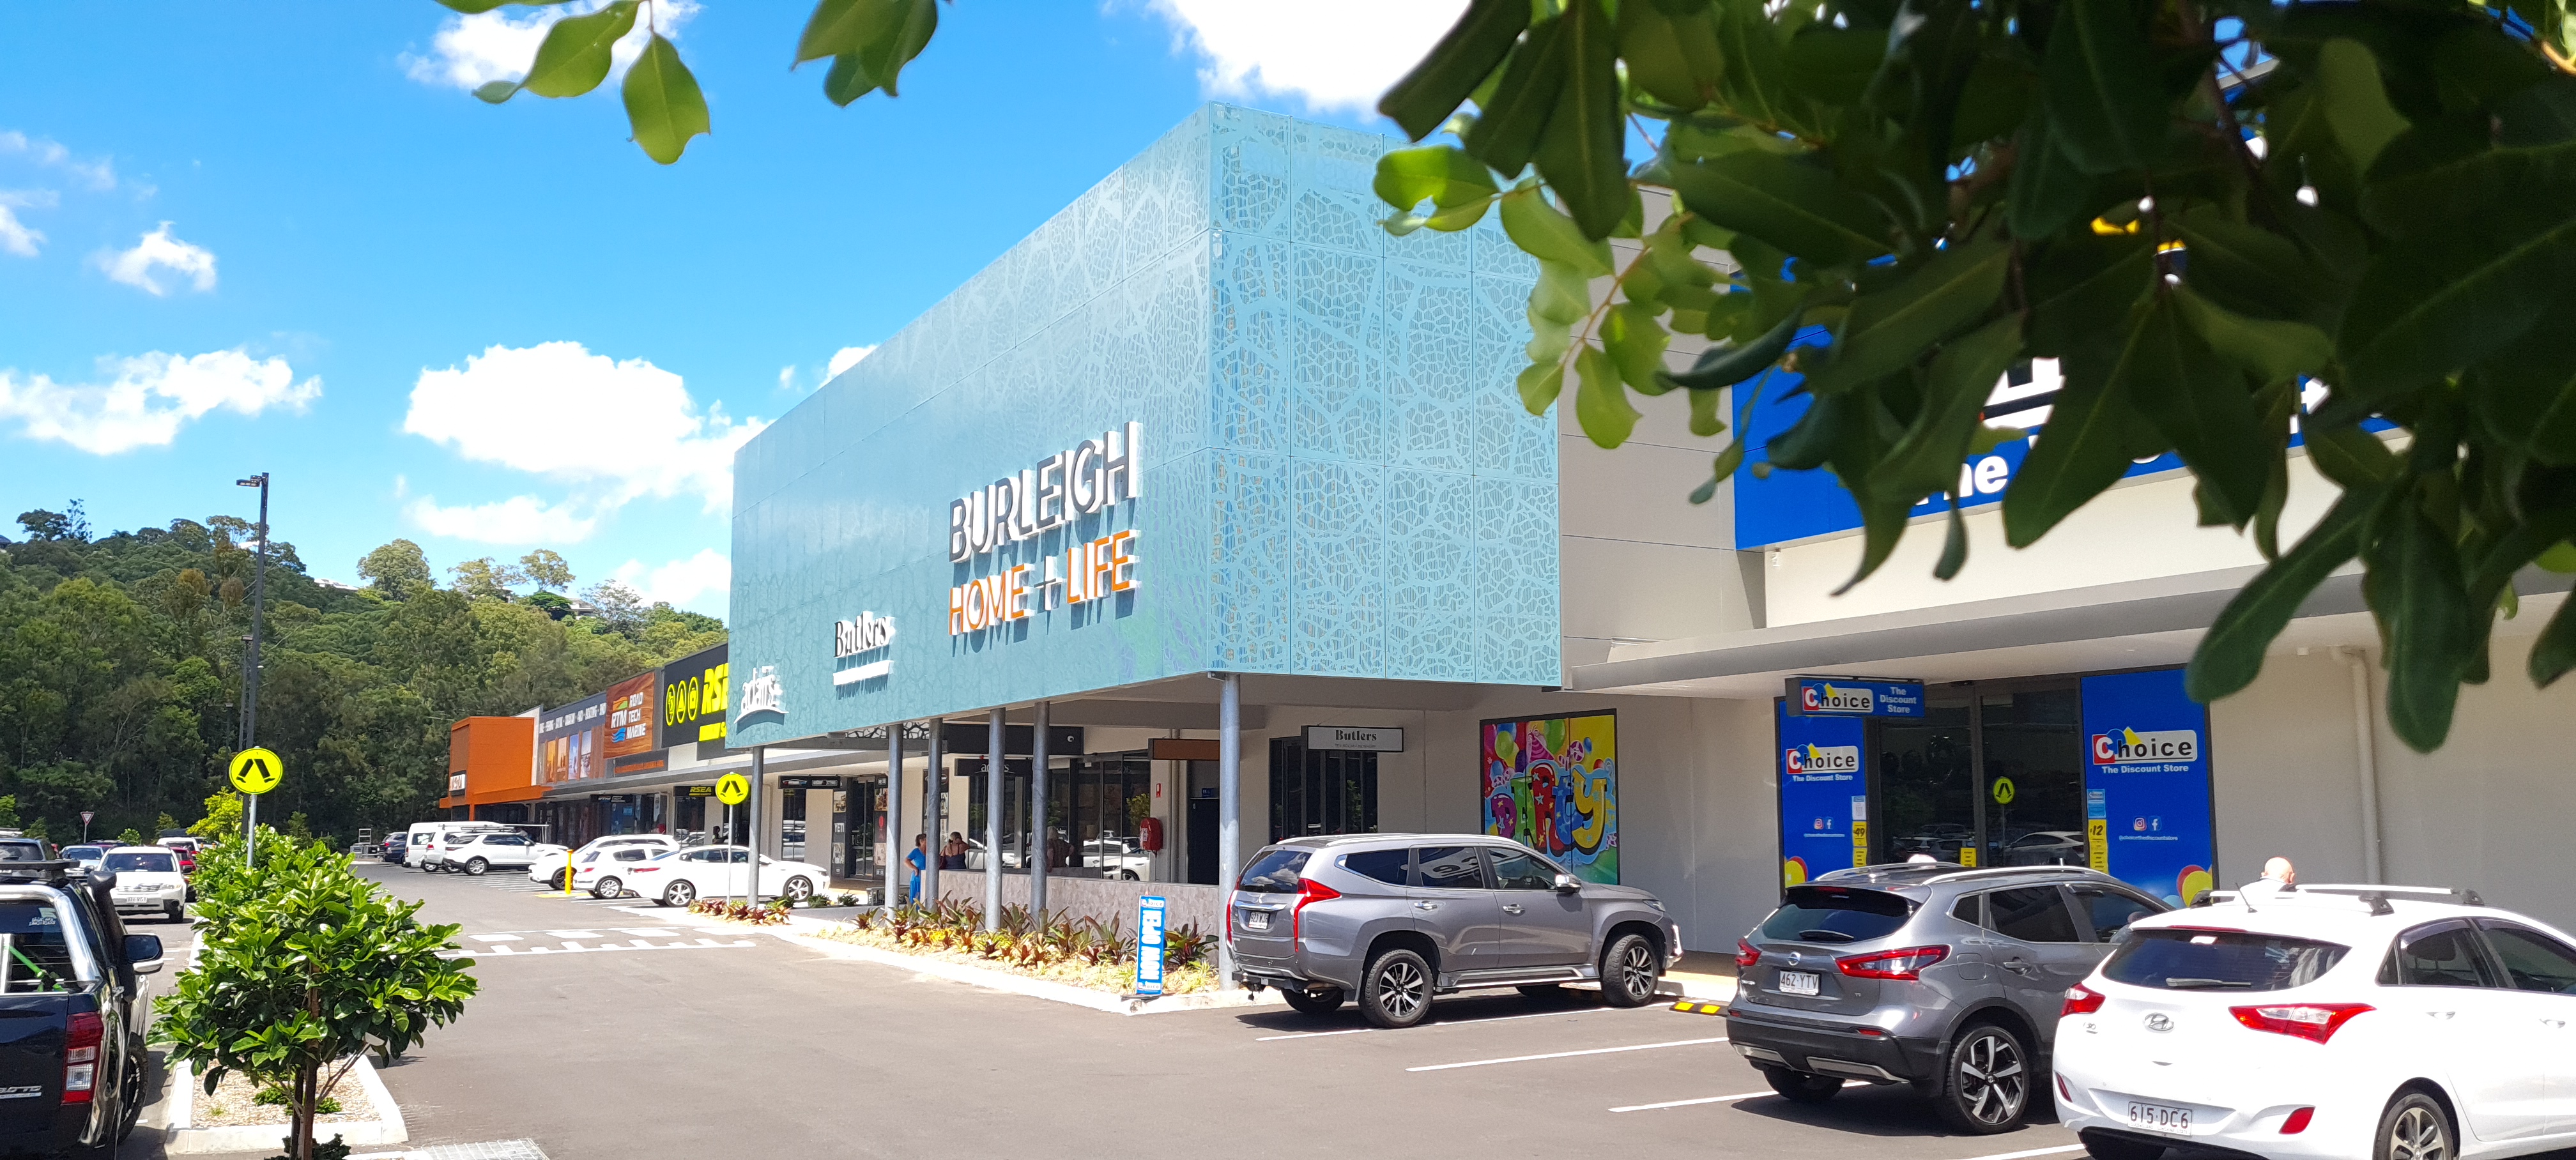 Burleigh waters Retail Large format